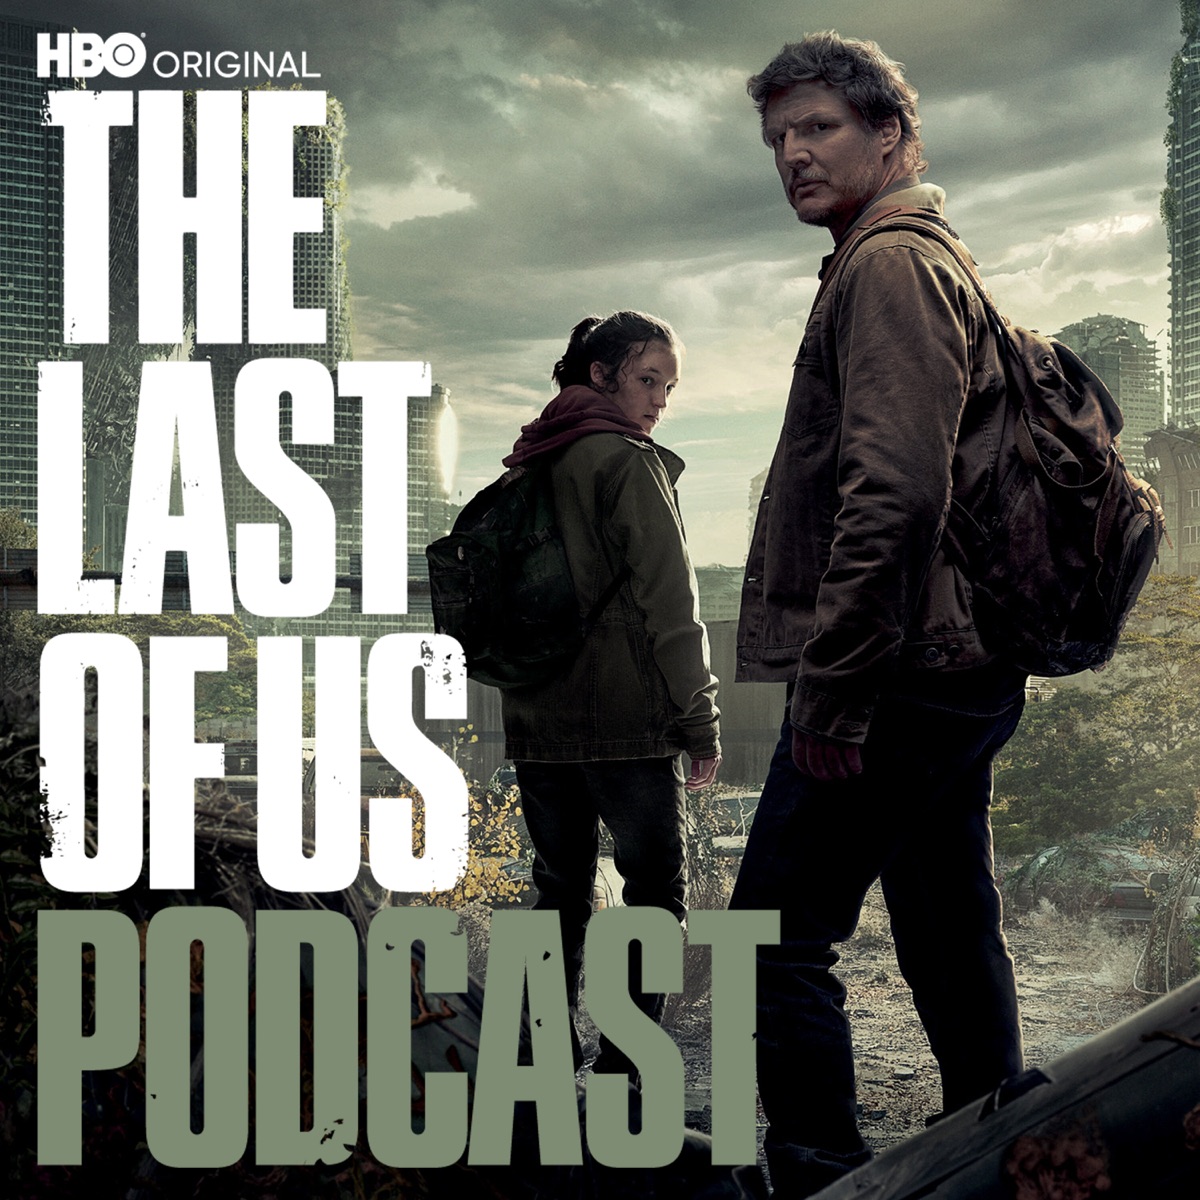 HBO's The Last of Us Podcast – Podcast – Podtail